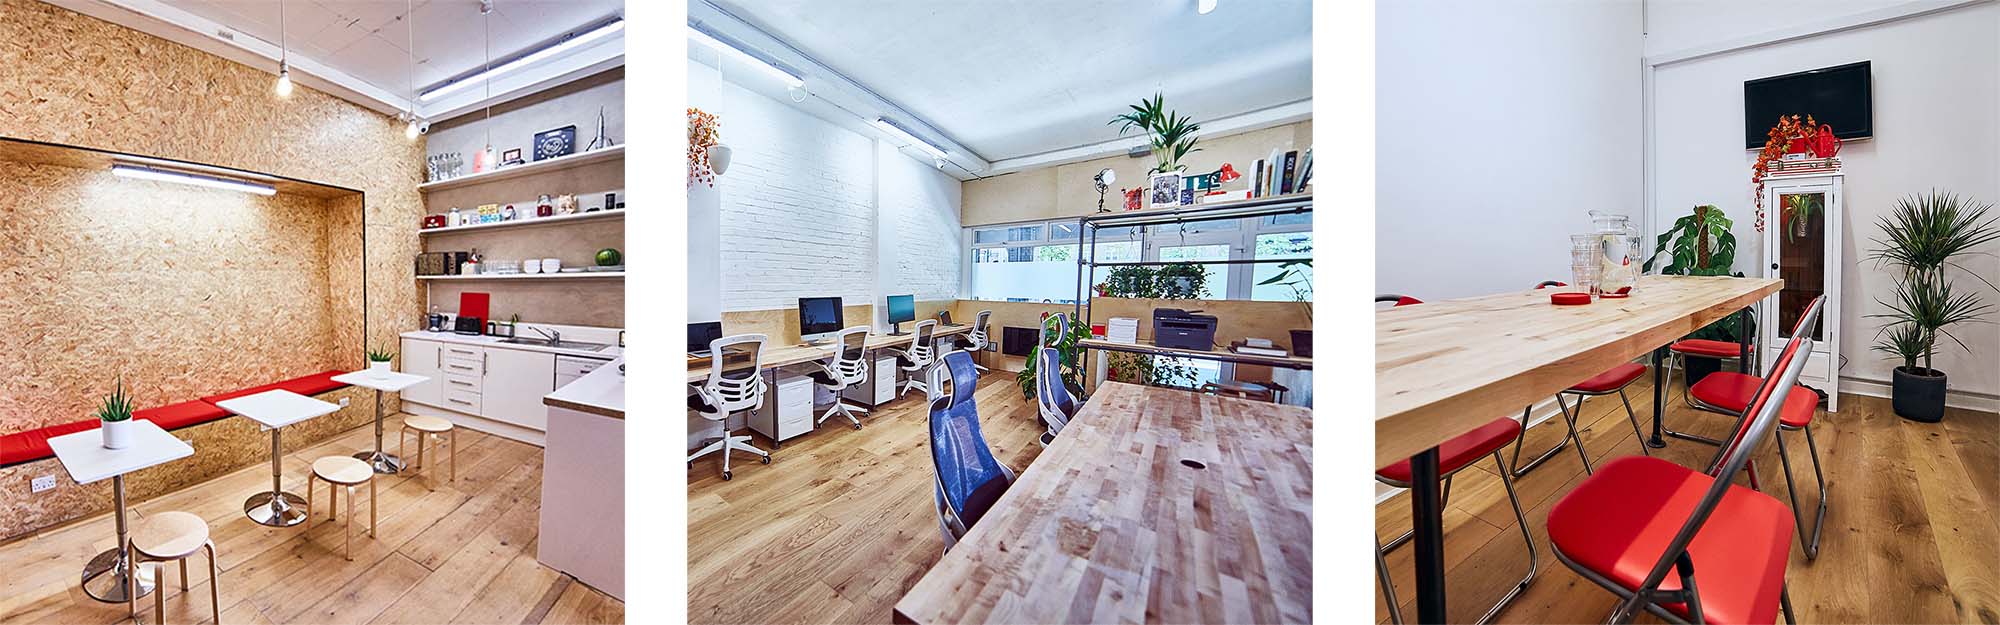 coworking office space near me